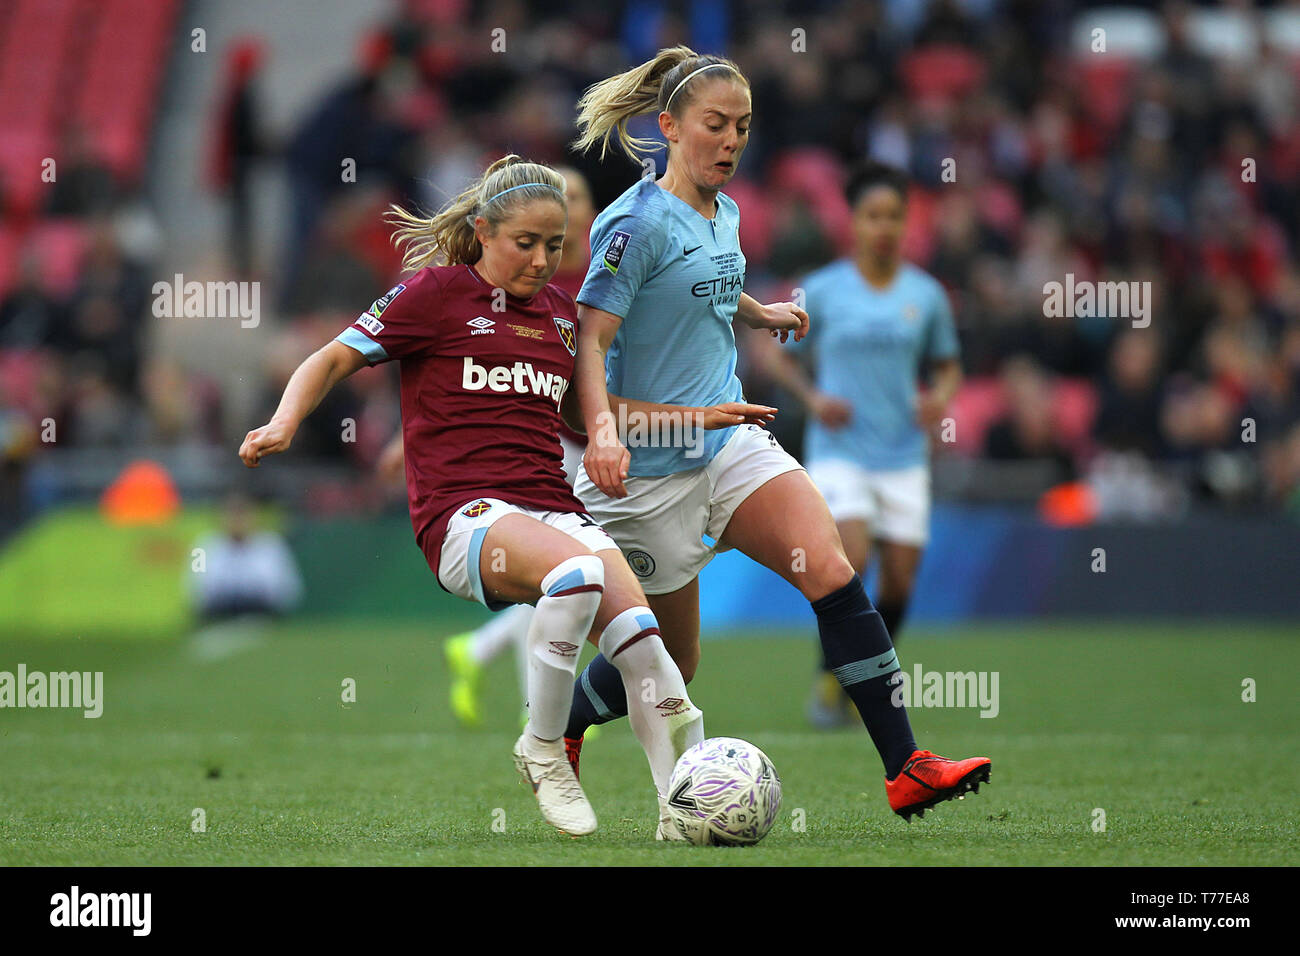 London, UK. 04th May, 2019. Brianna Visalli of West Ham Unitedand Keira Walsh of Manchester City during the FA Women's Cup Final match between Manchester City Women and West Ham United Ladies at Wembley Stadium on May 4th 2019 in London, England. Credit: PHC Images/Alamy Live News Stock Photo